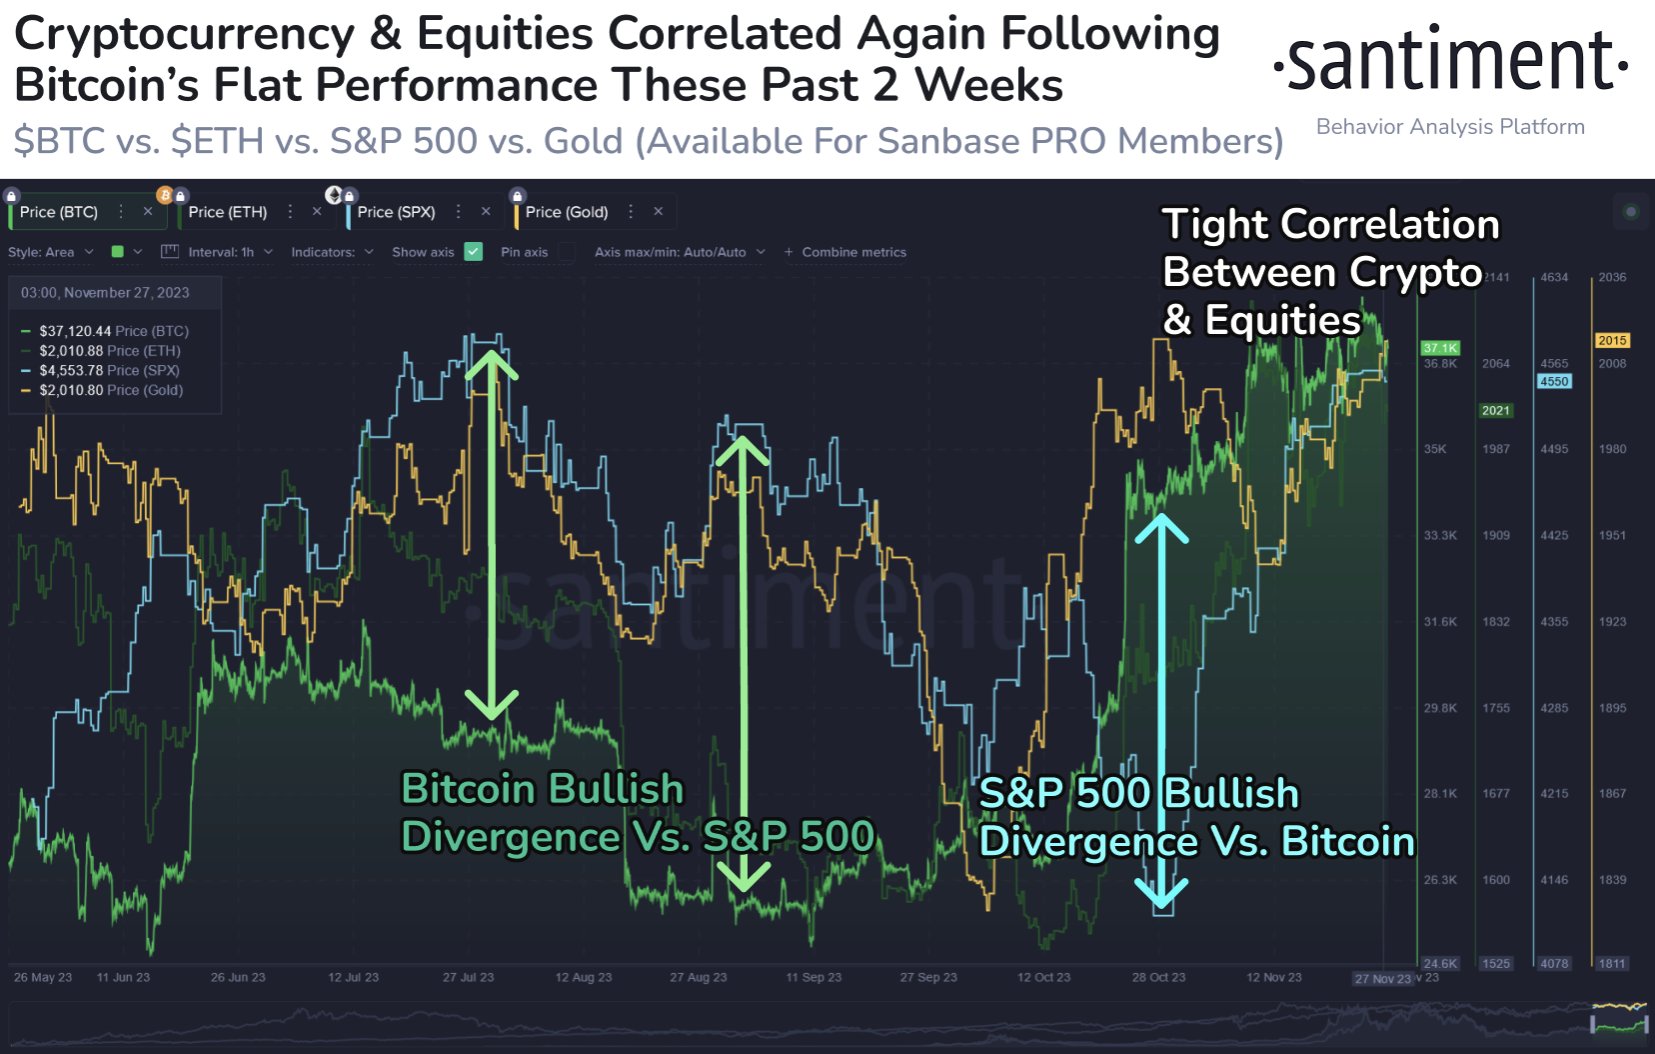 Cryptocurrency and equities correlation